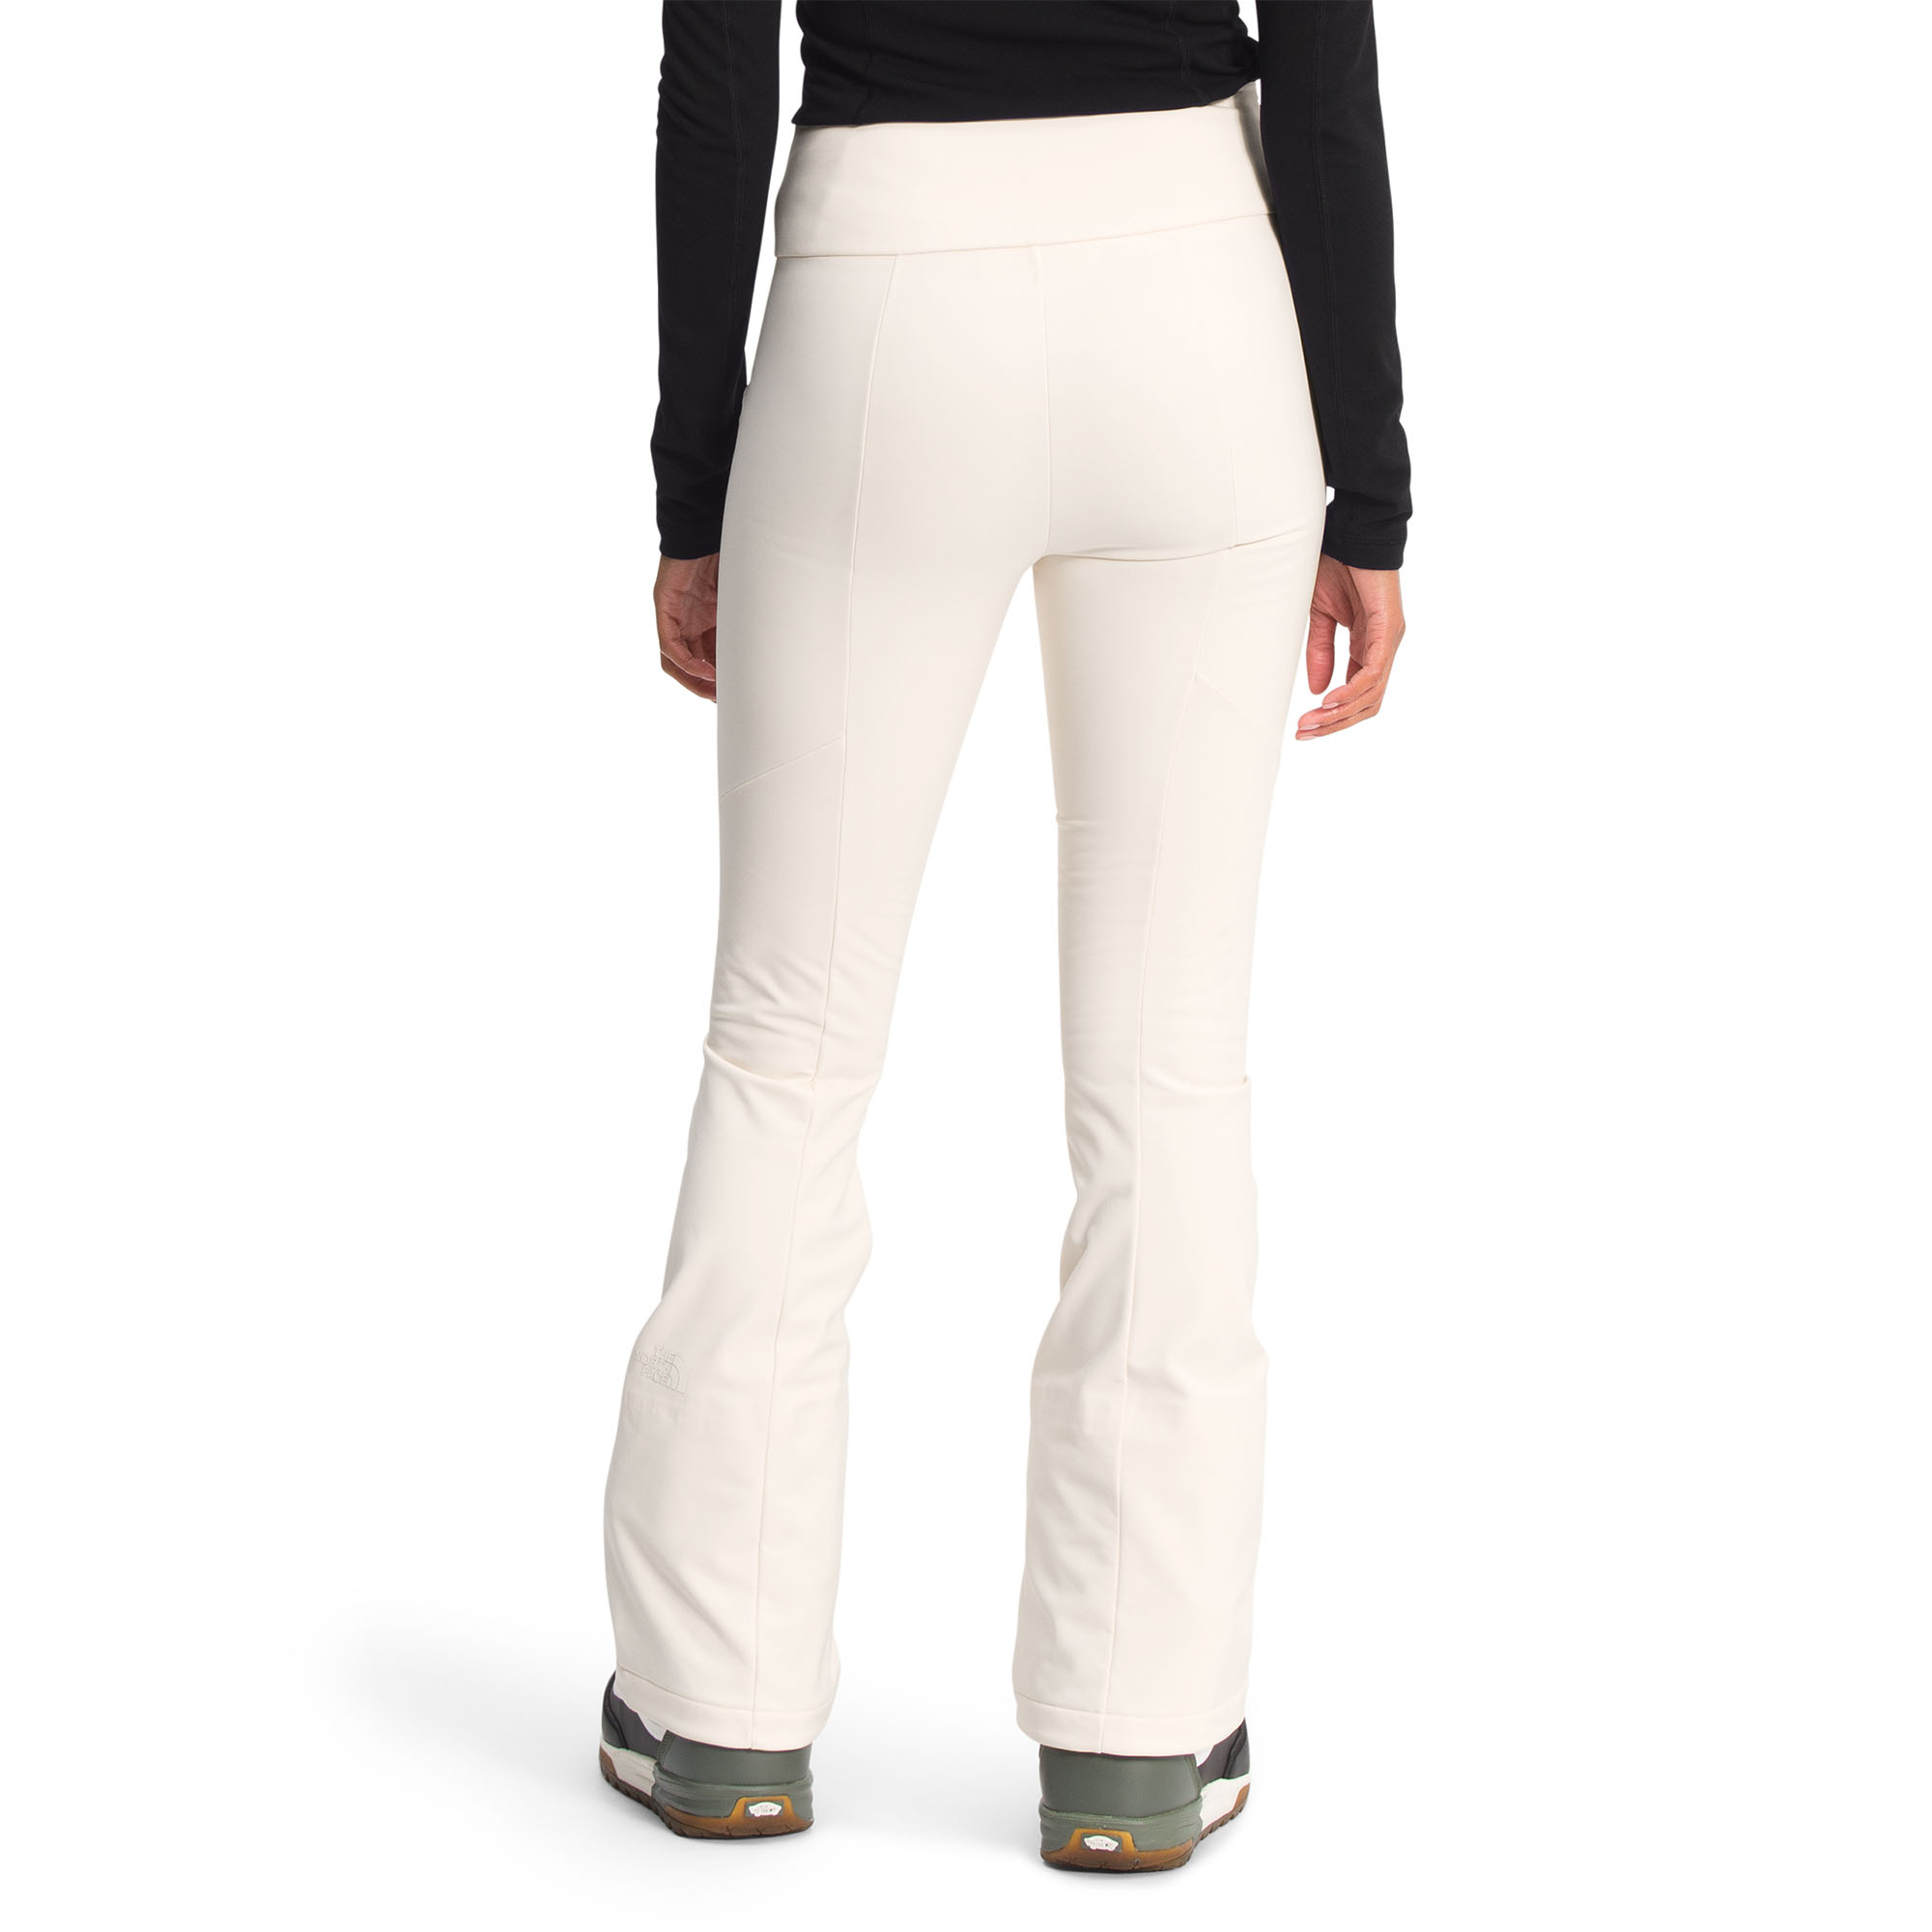 The North Face Women's Snoga Snow Pants